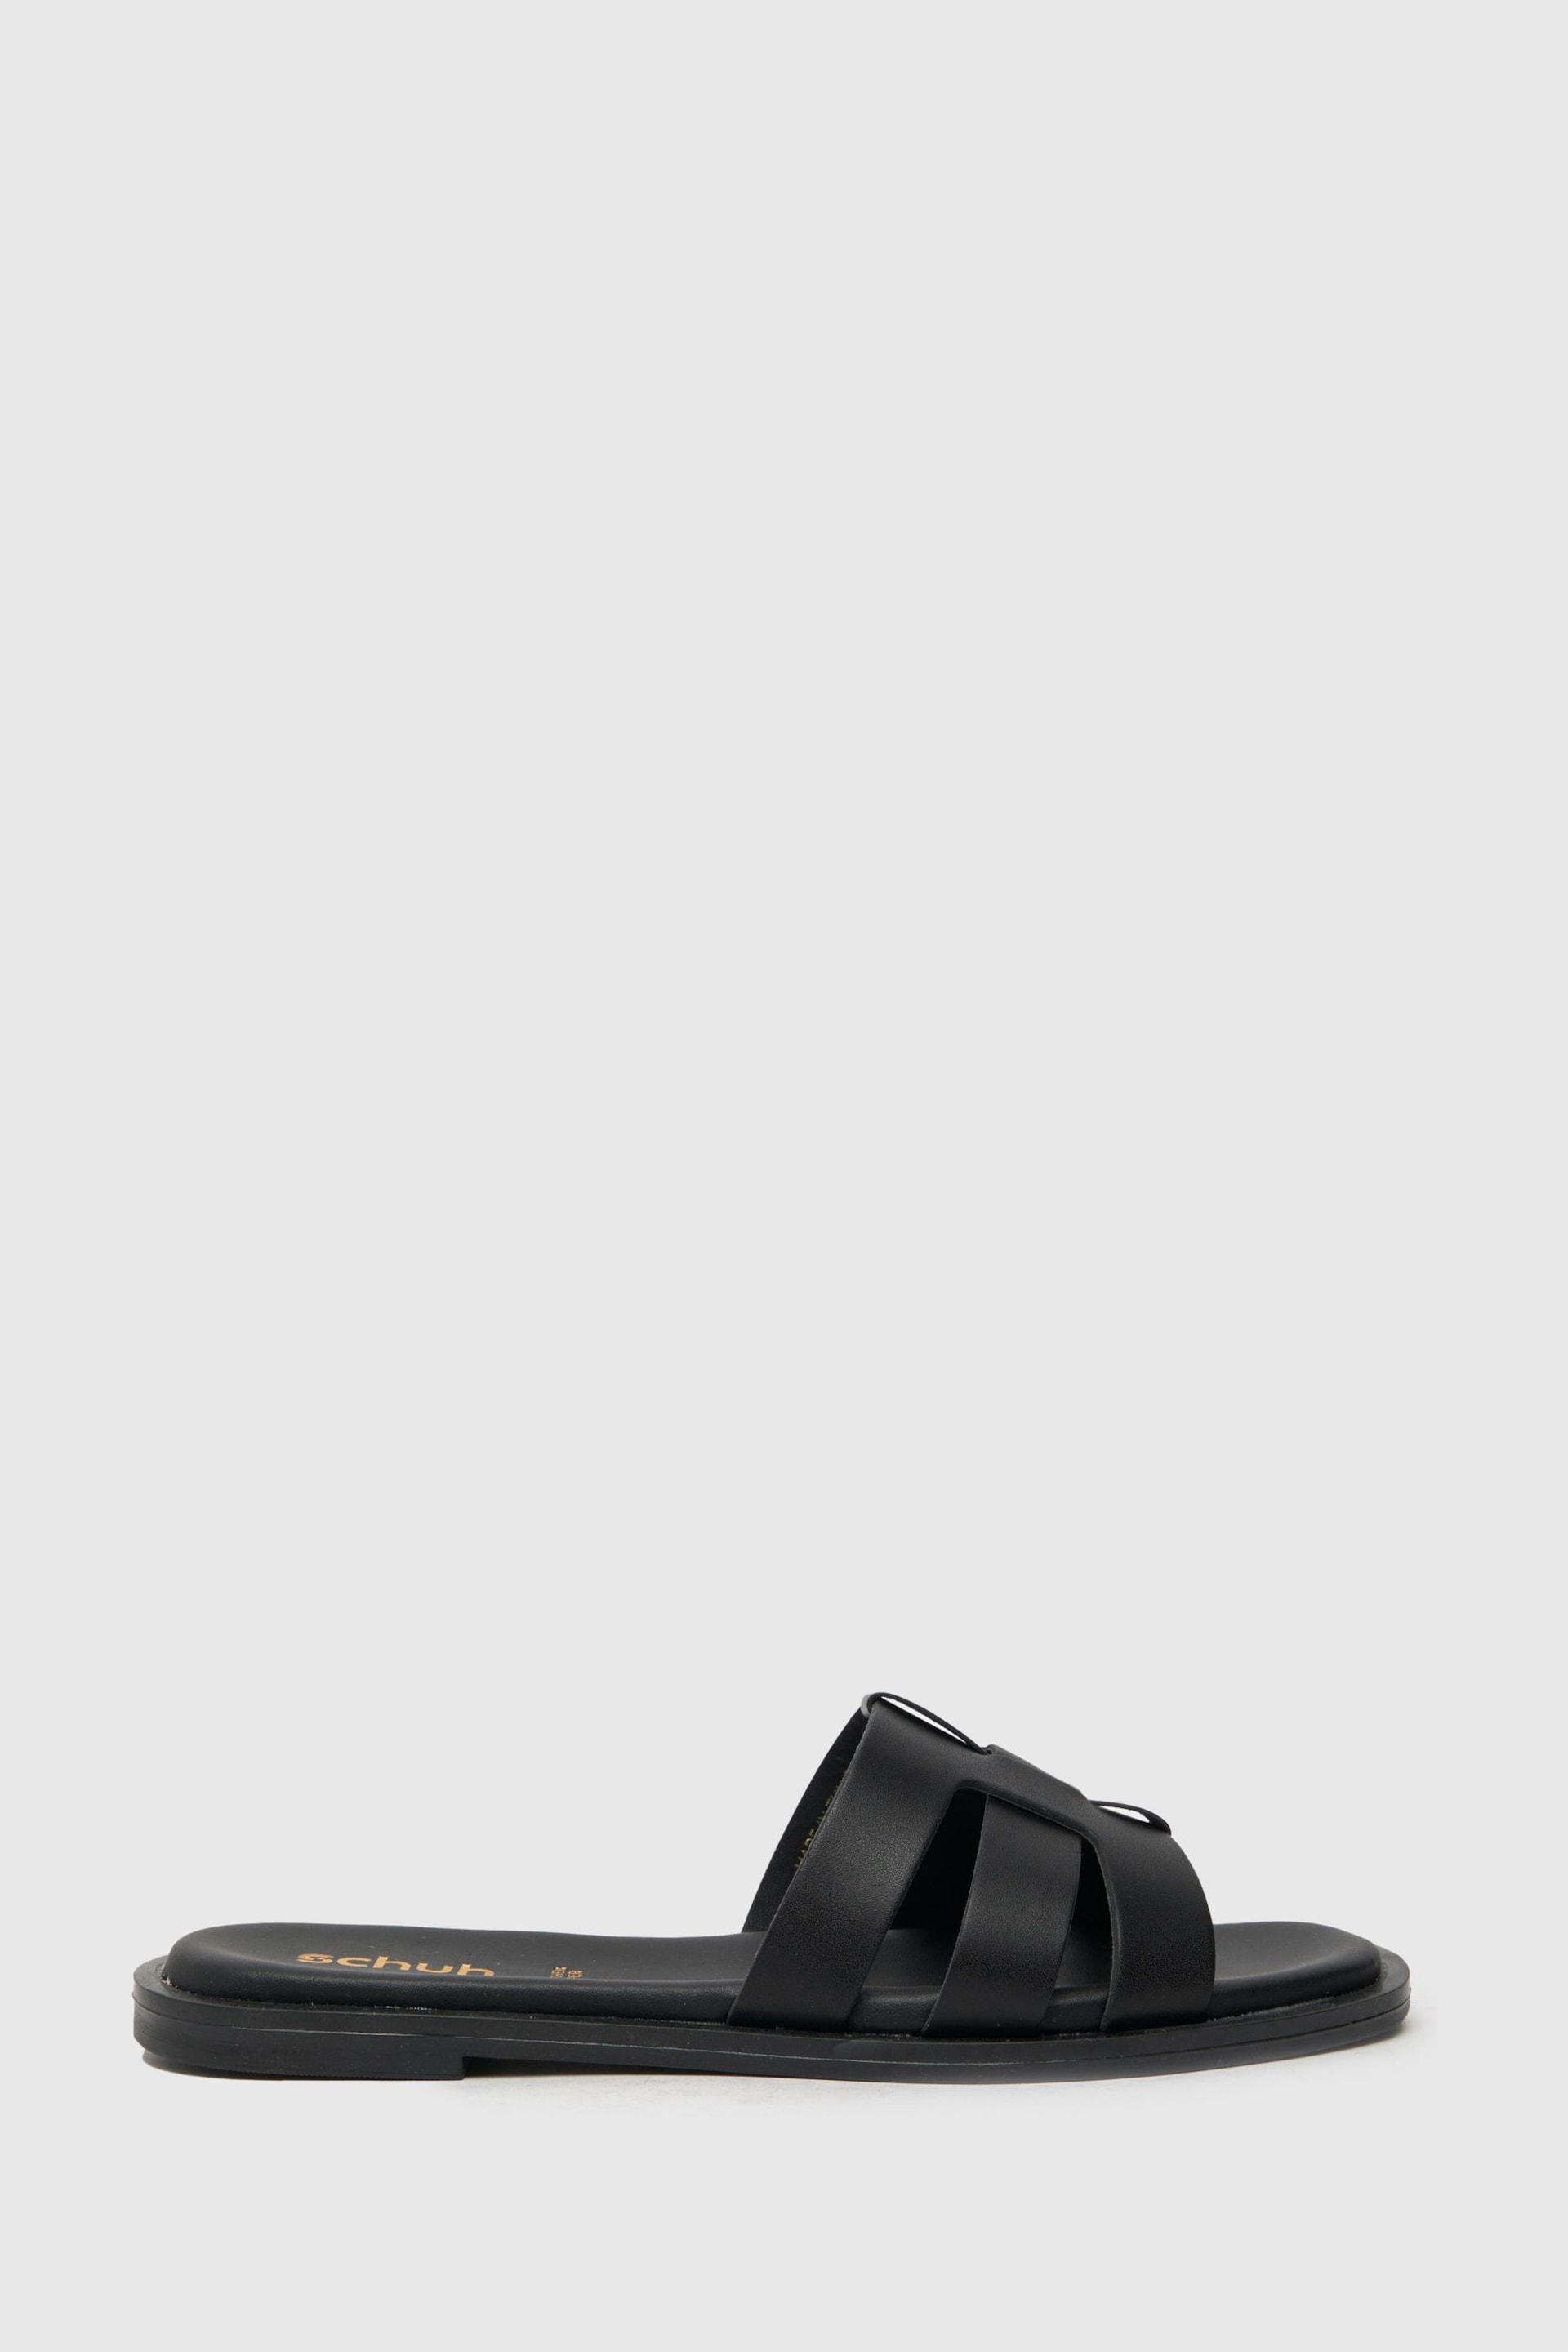 Schuh Tierney Leather Sliders - Image 1 of 4